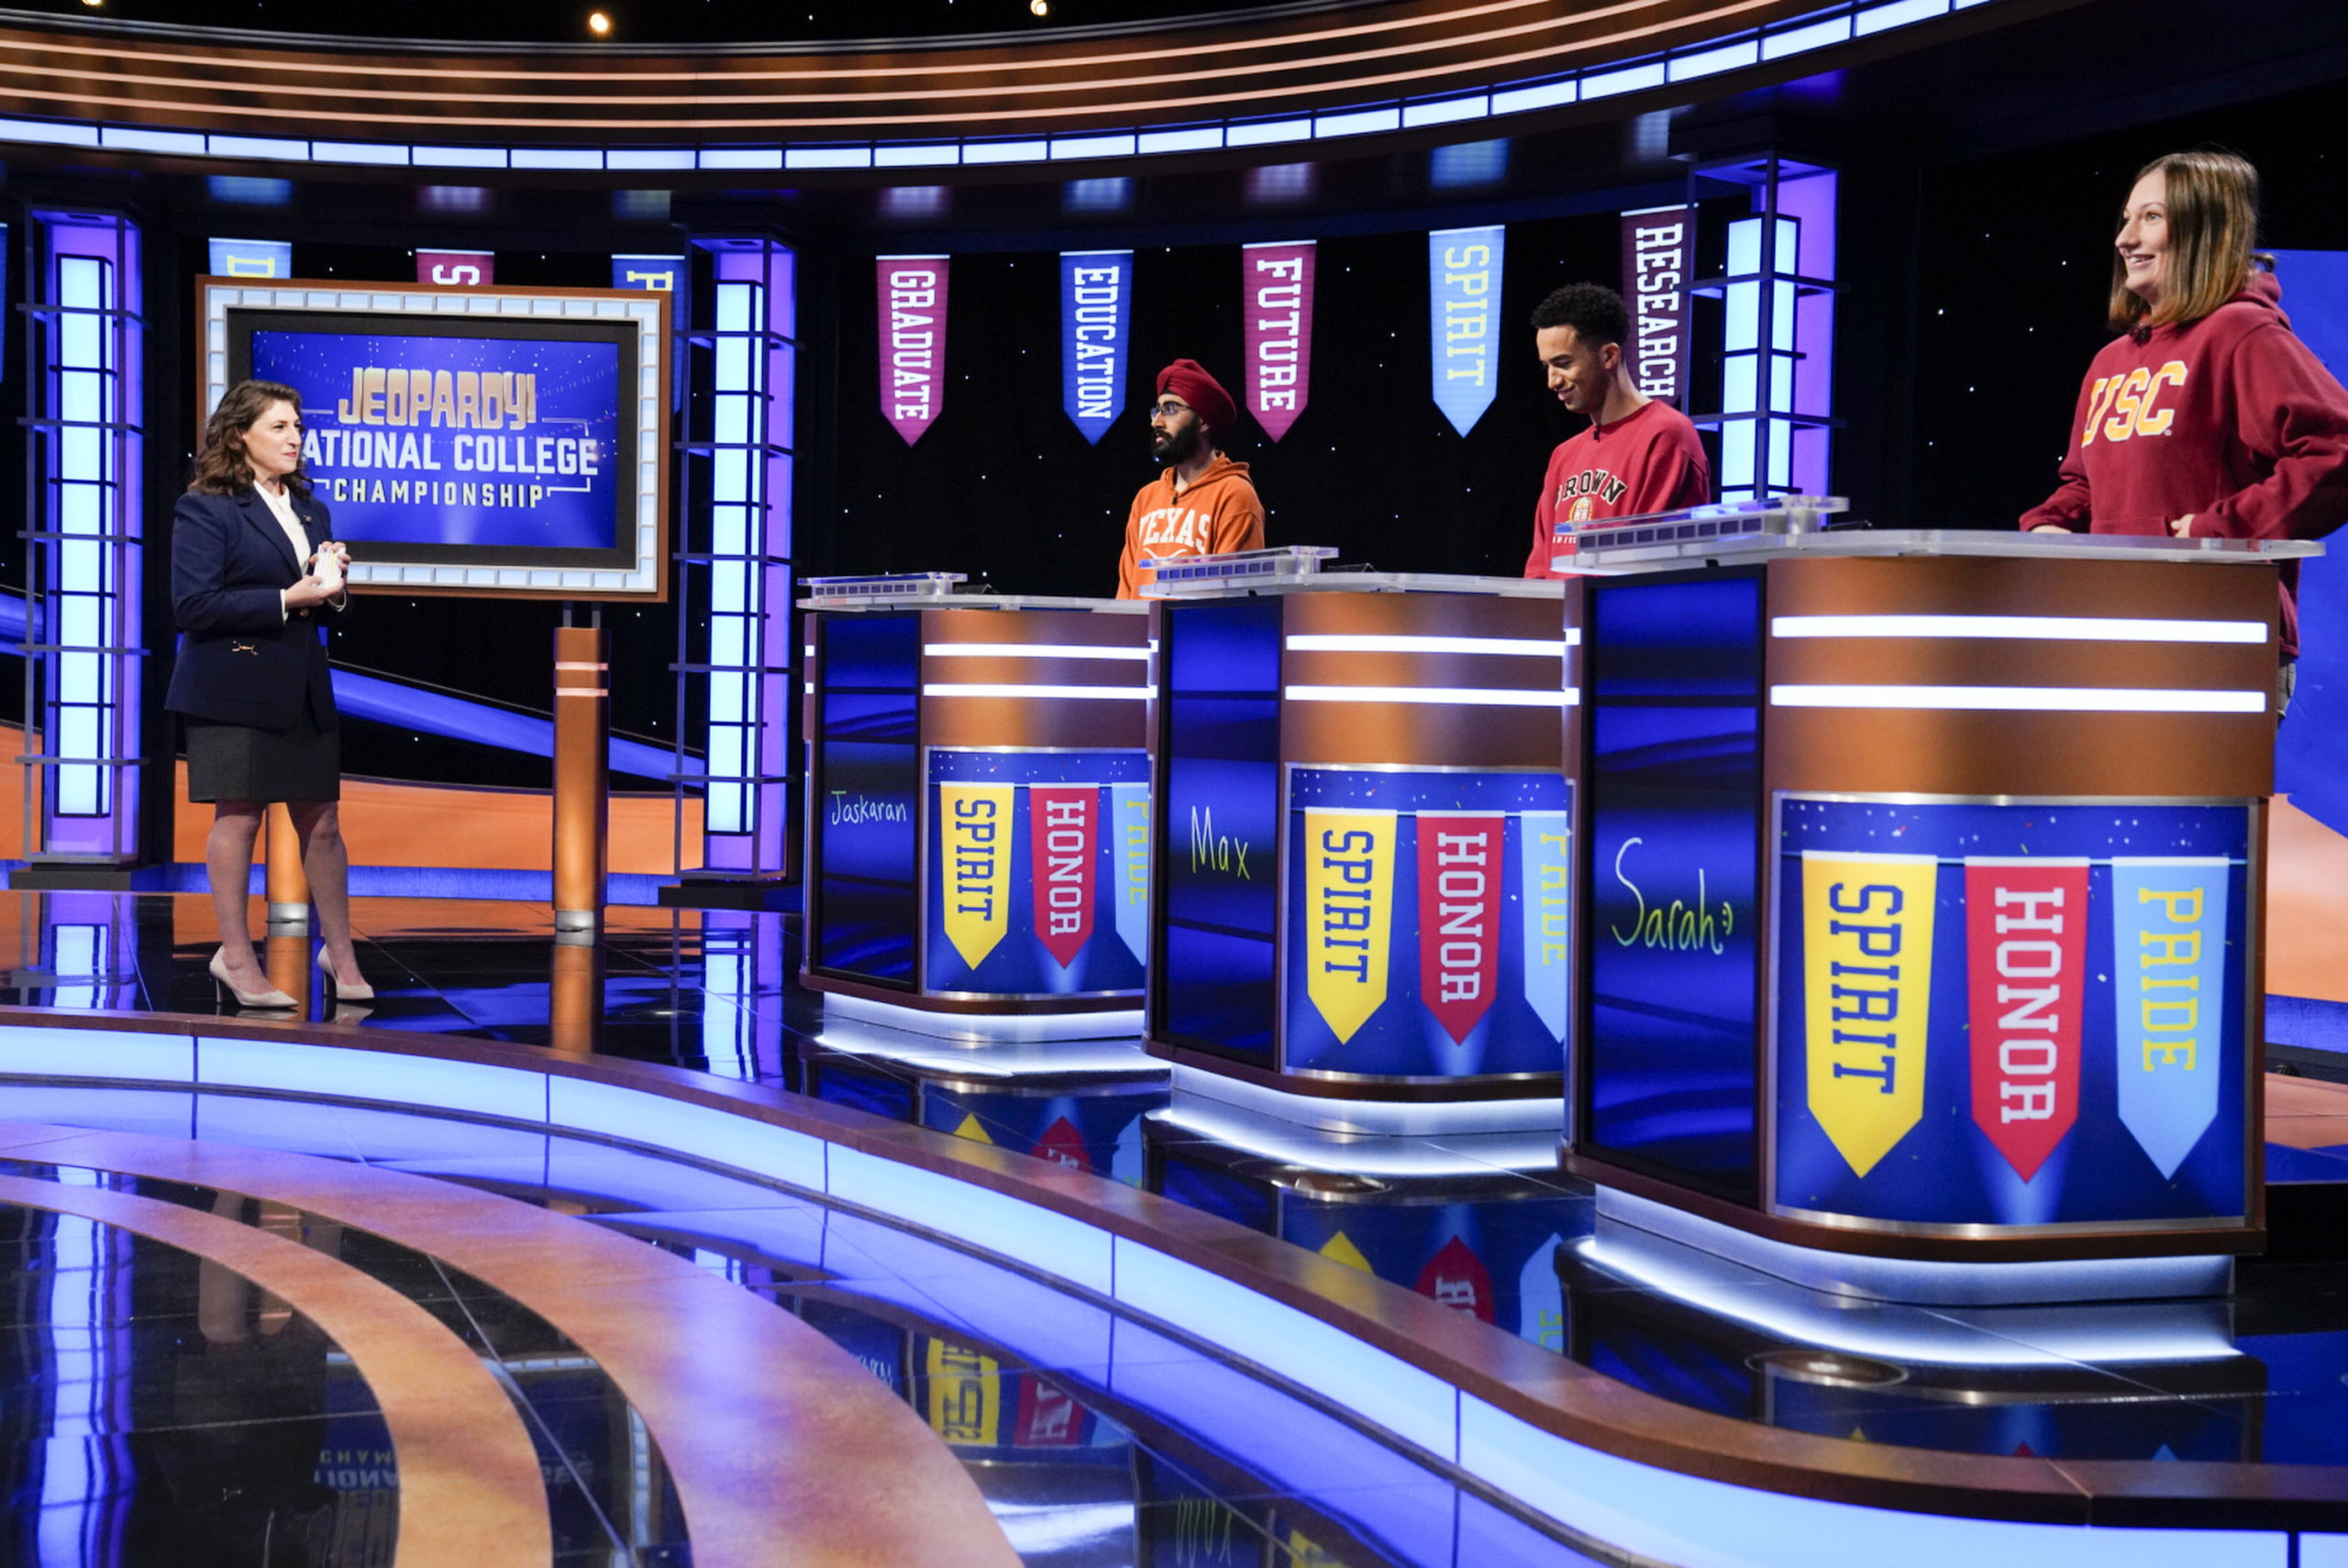 Jeopardy! National College Championship TV Show on ABC Season One